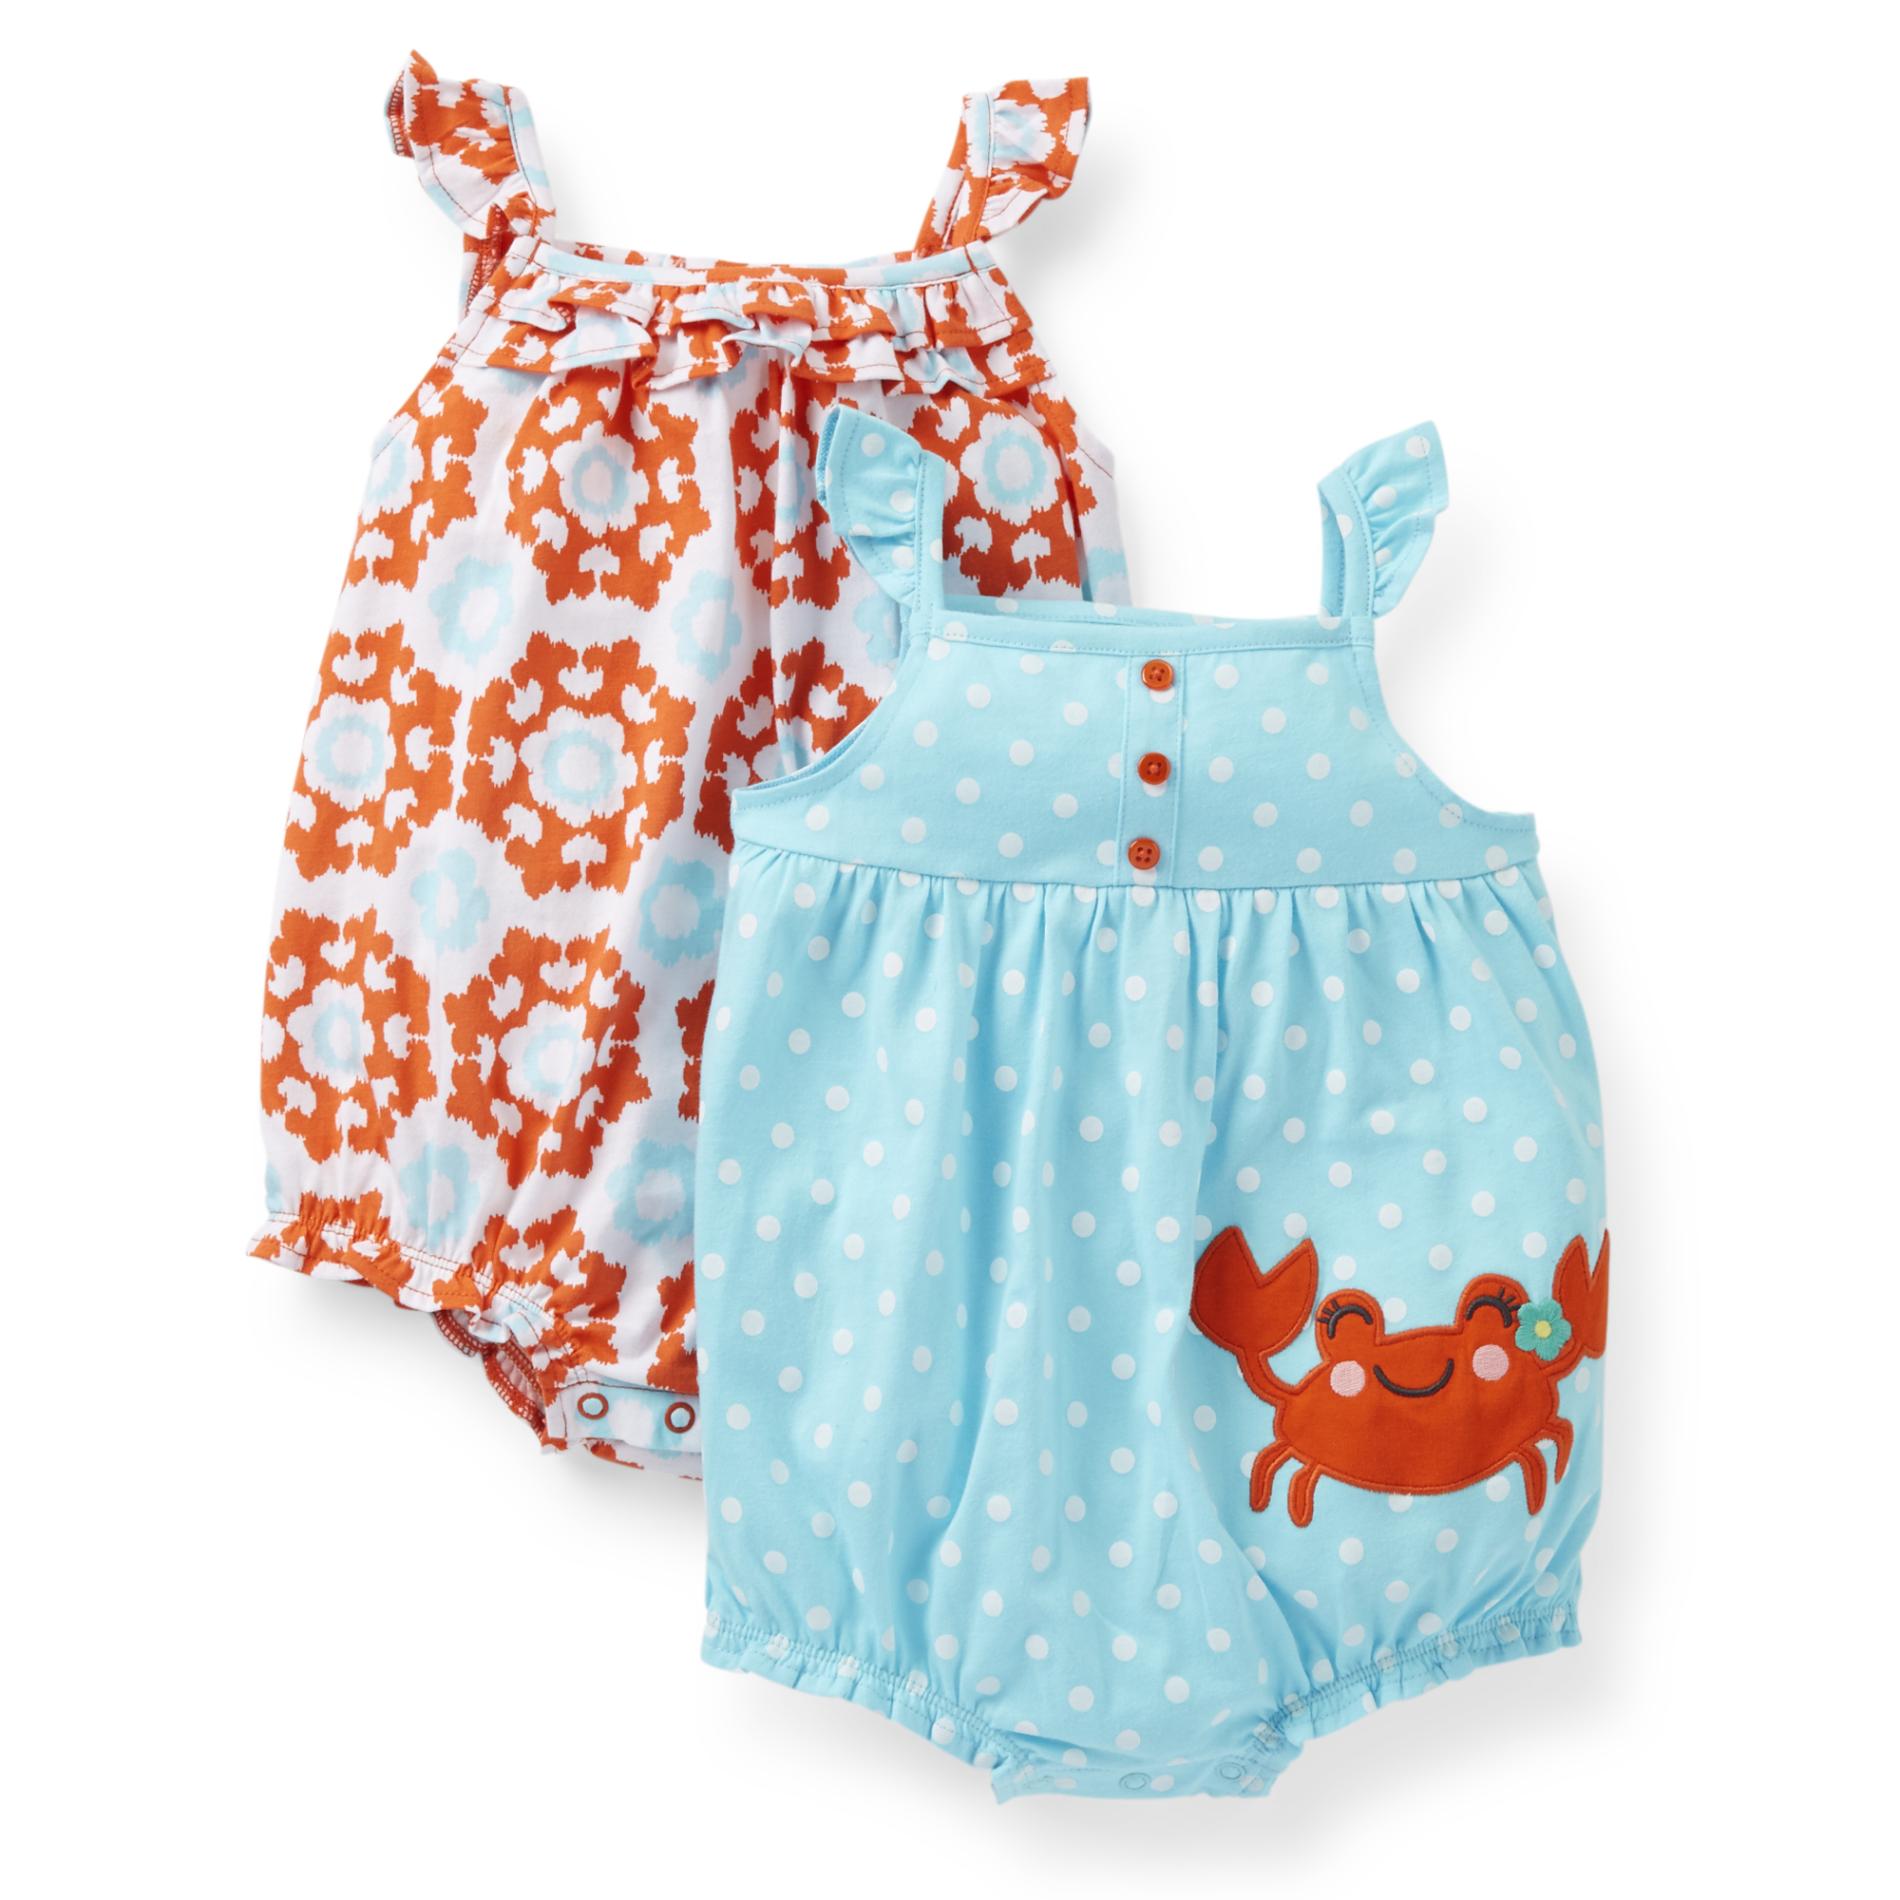 Carter's Newborn & Infant Girl's 2-Pack Rompers - Crab